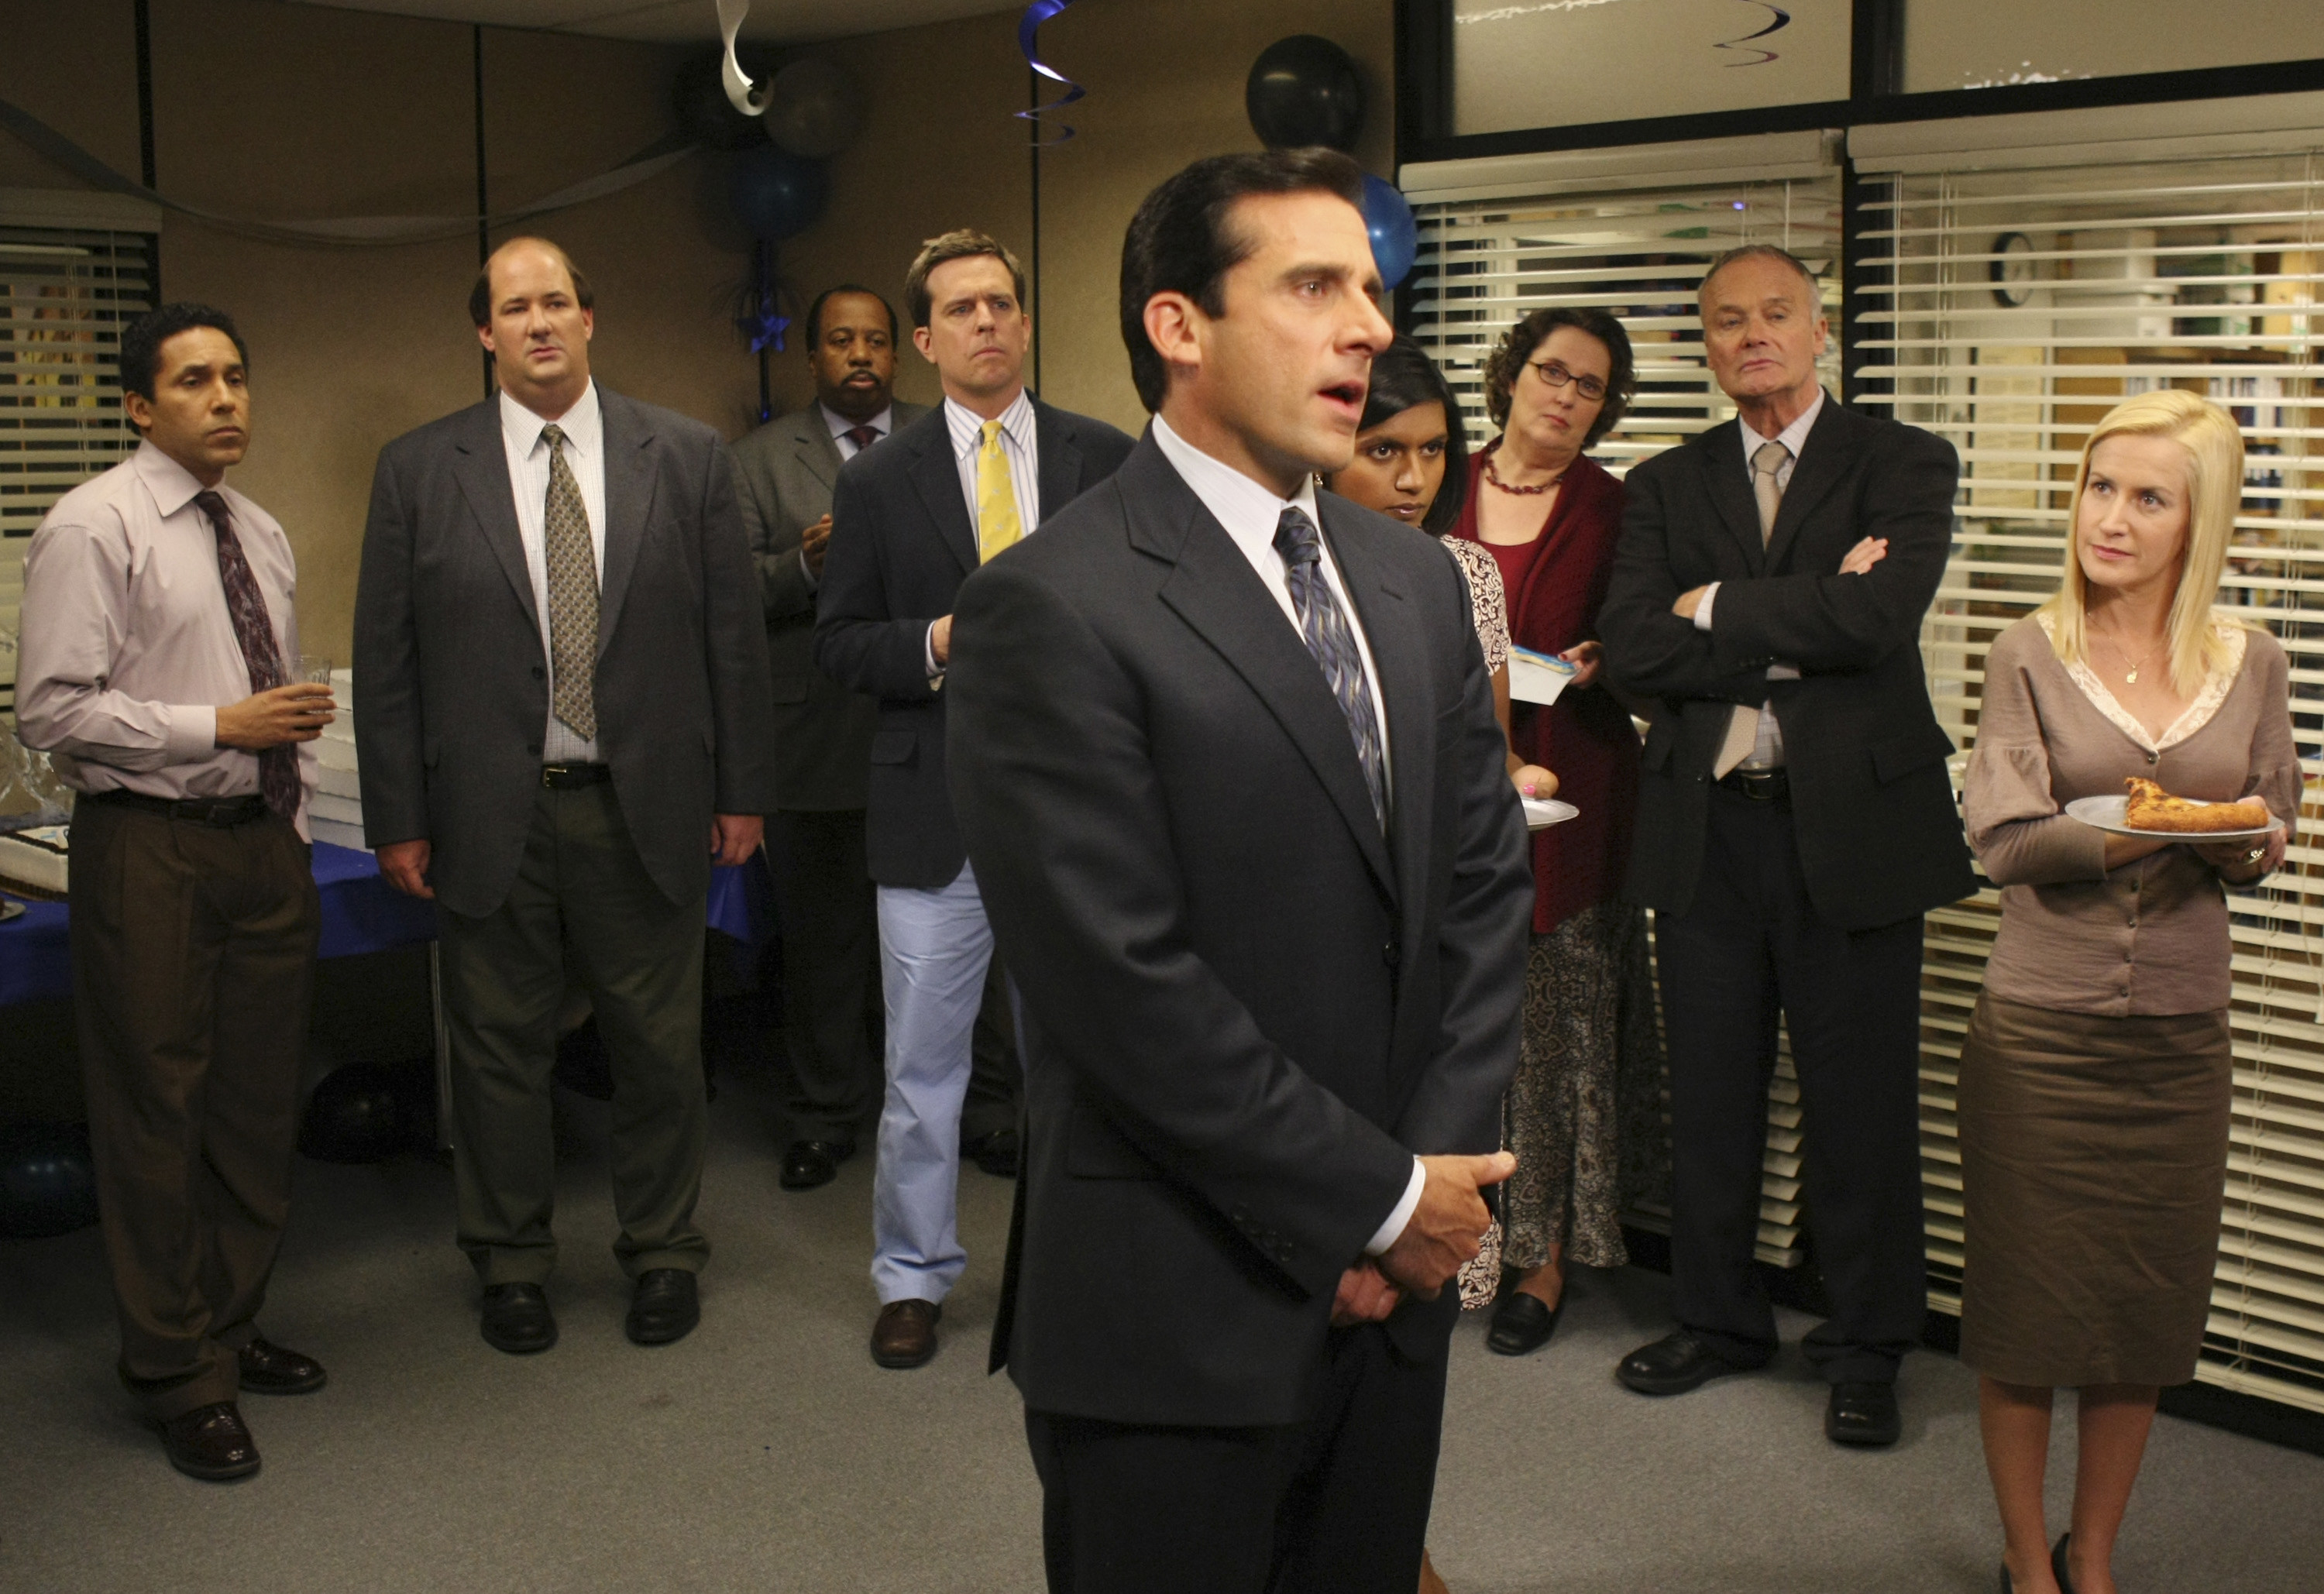 A still from The Office